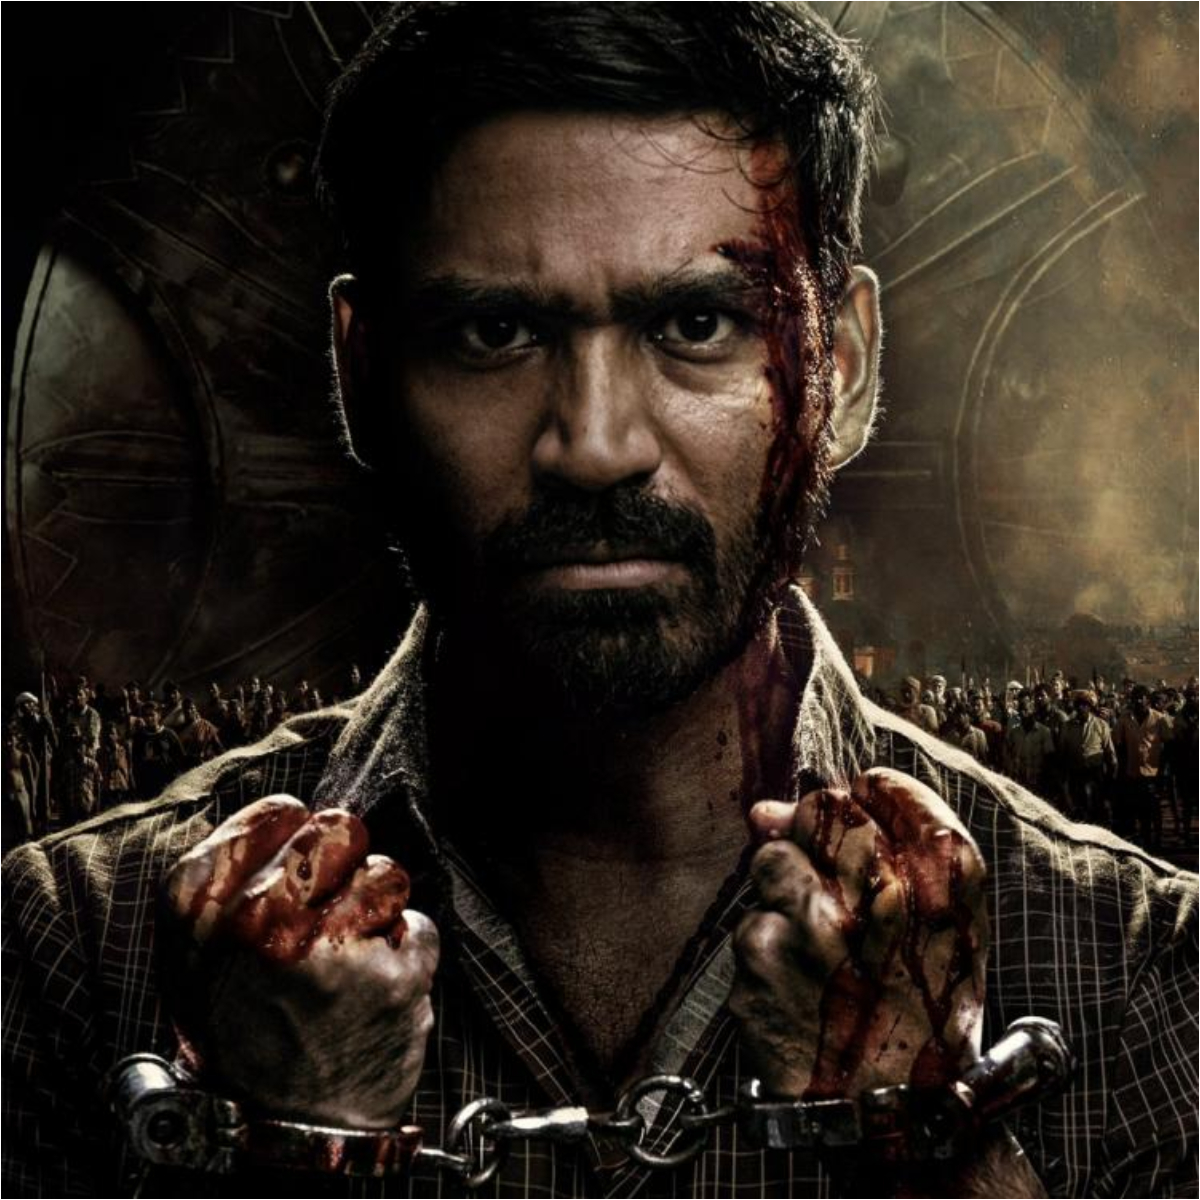 Karnan Twitter Review: Here's what audience has to say about Dhanush starrer action drama